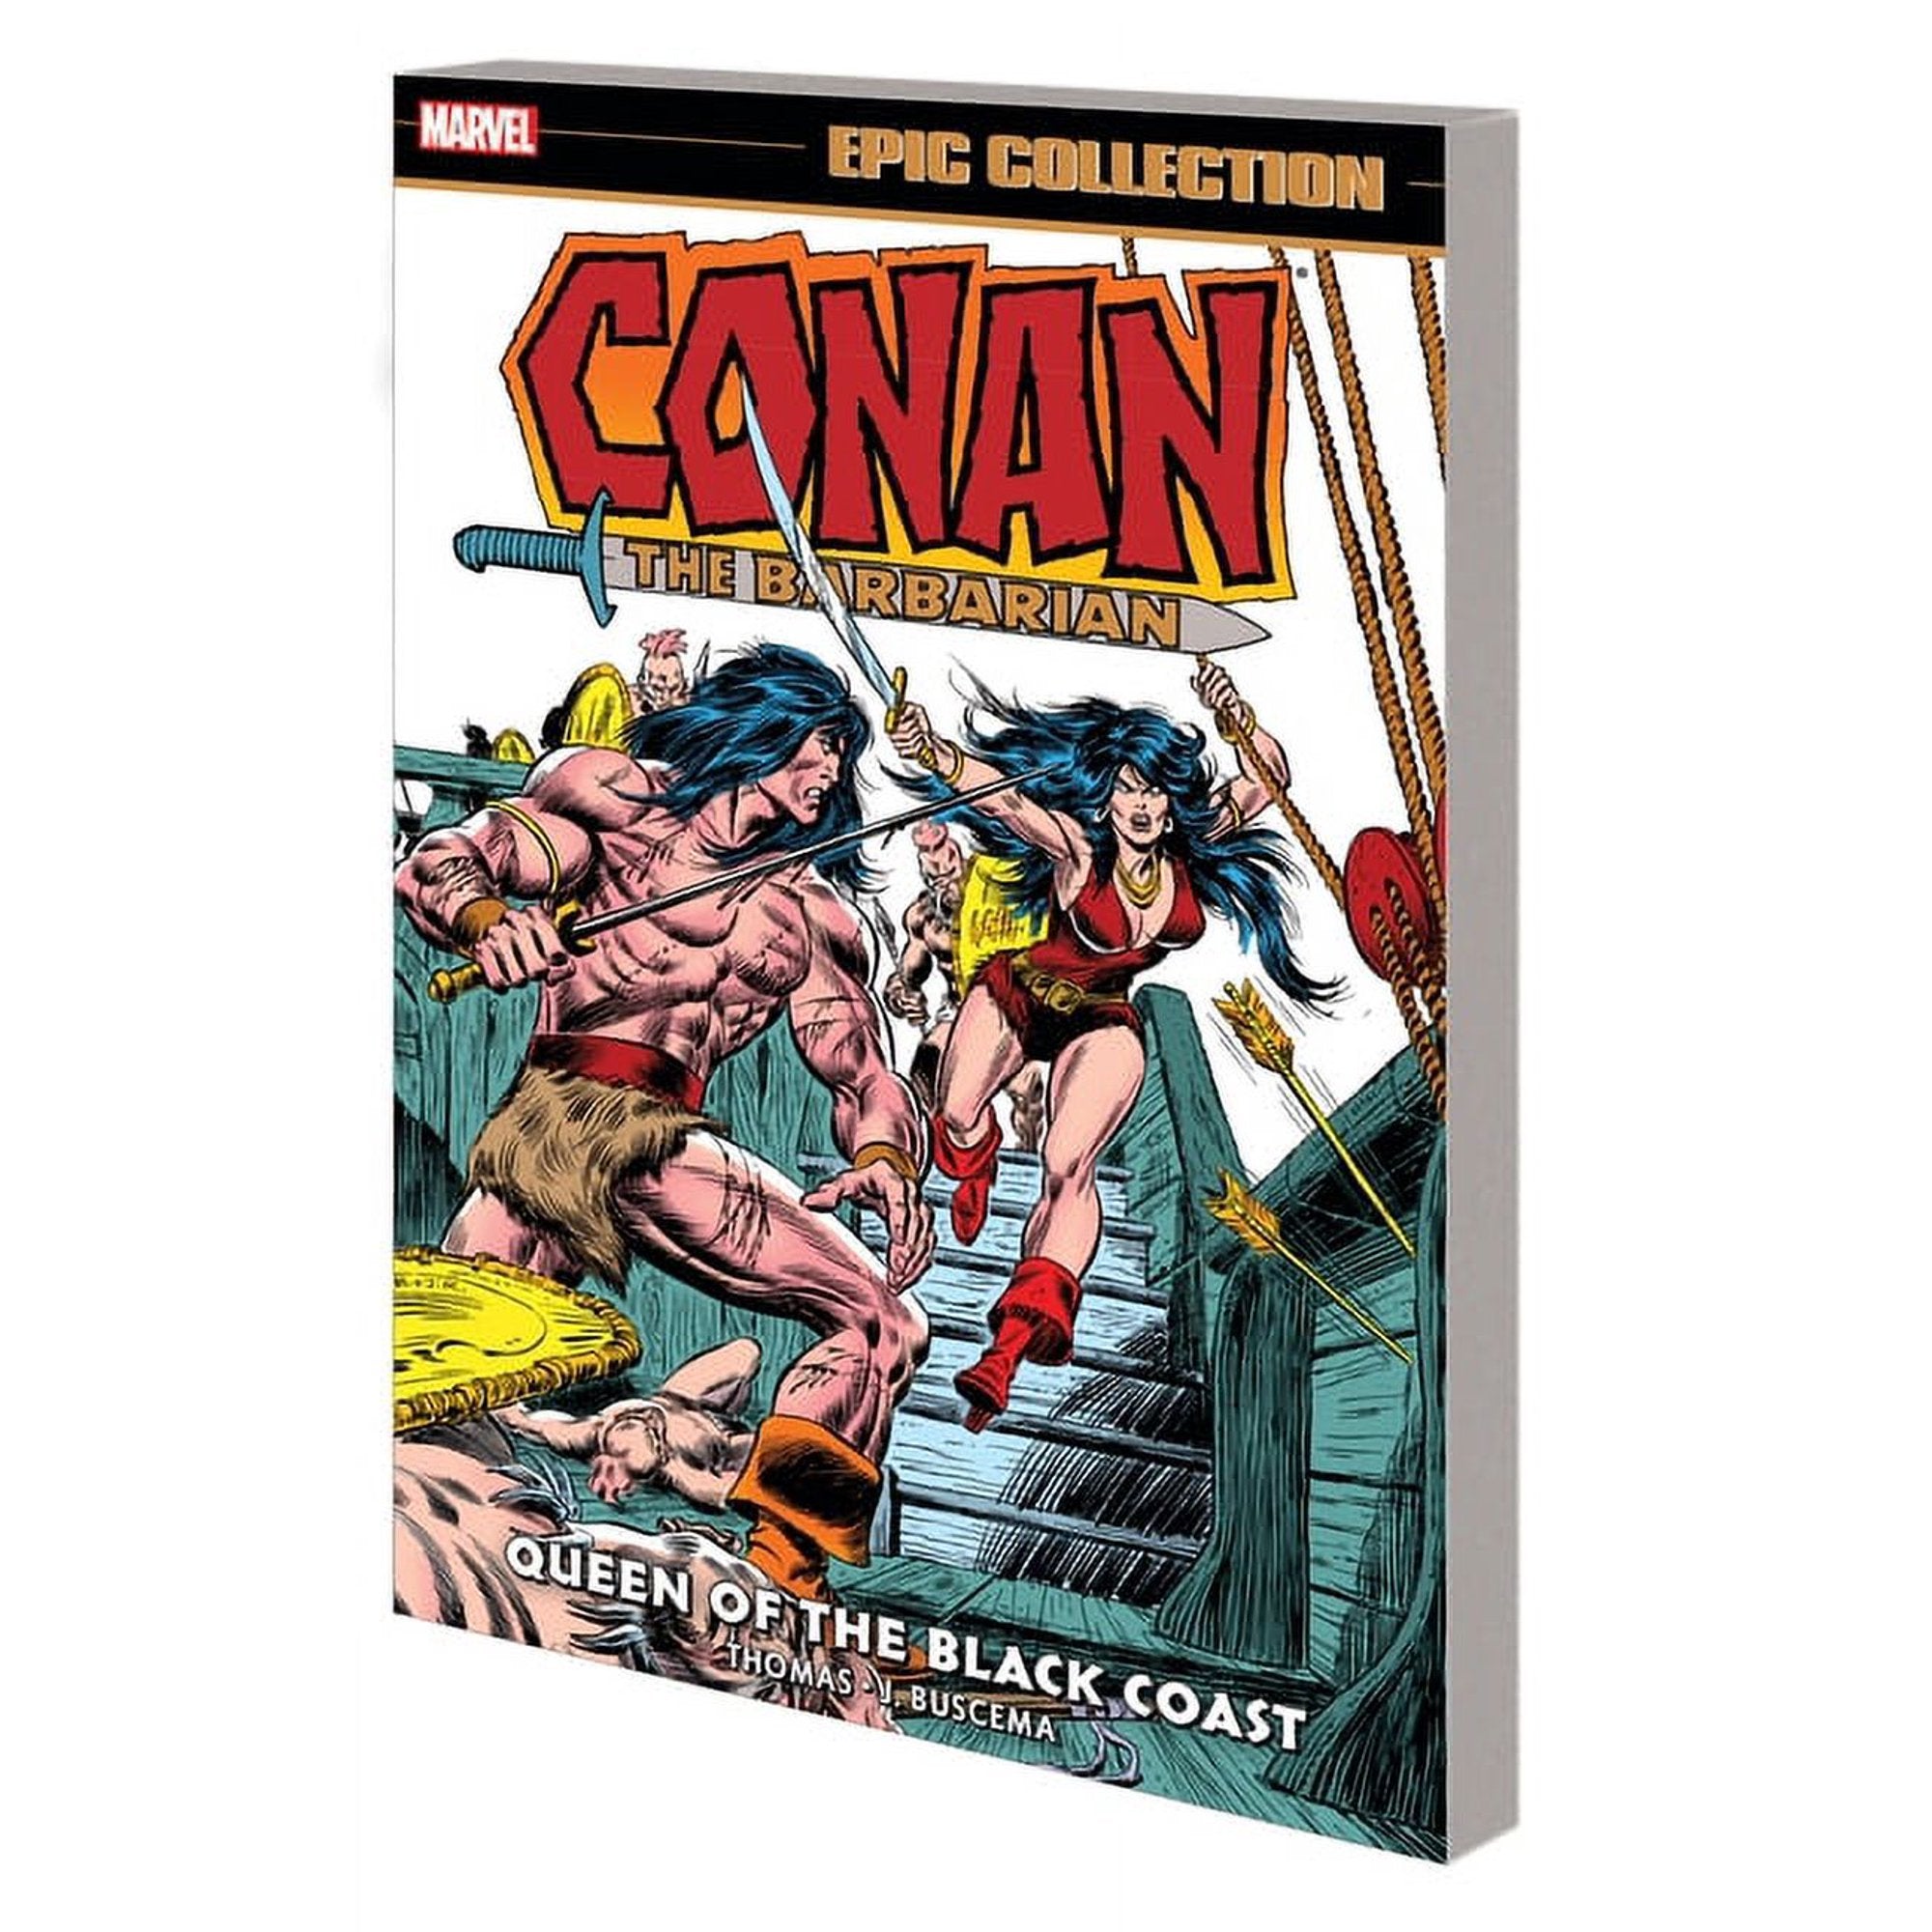 Marvel Epic Collection Conan The Barbarian V.4 Queen Of The Black Coast